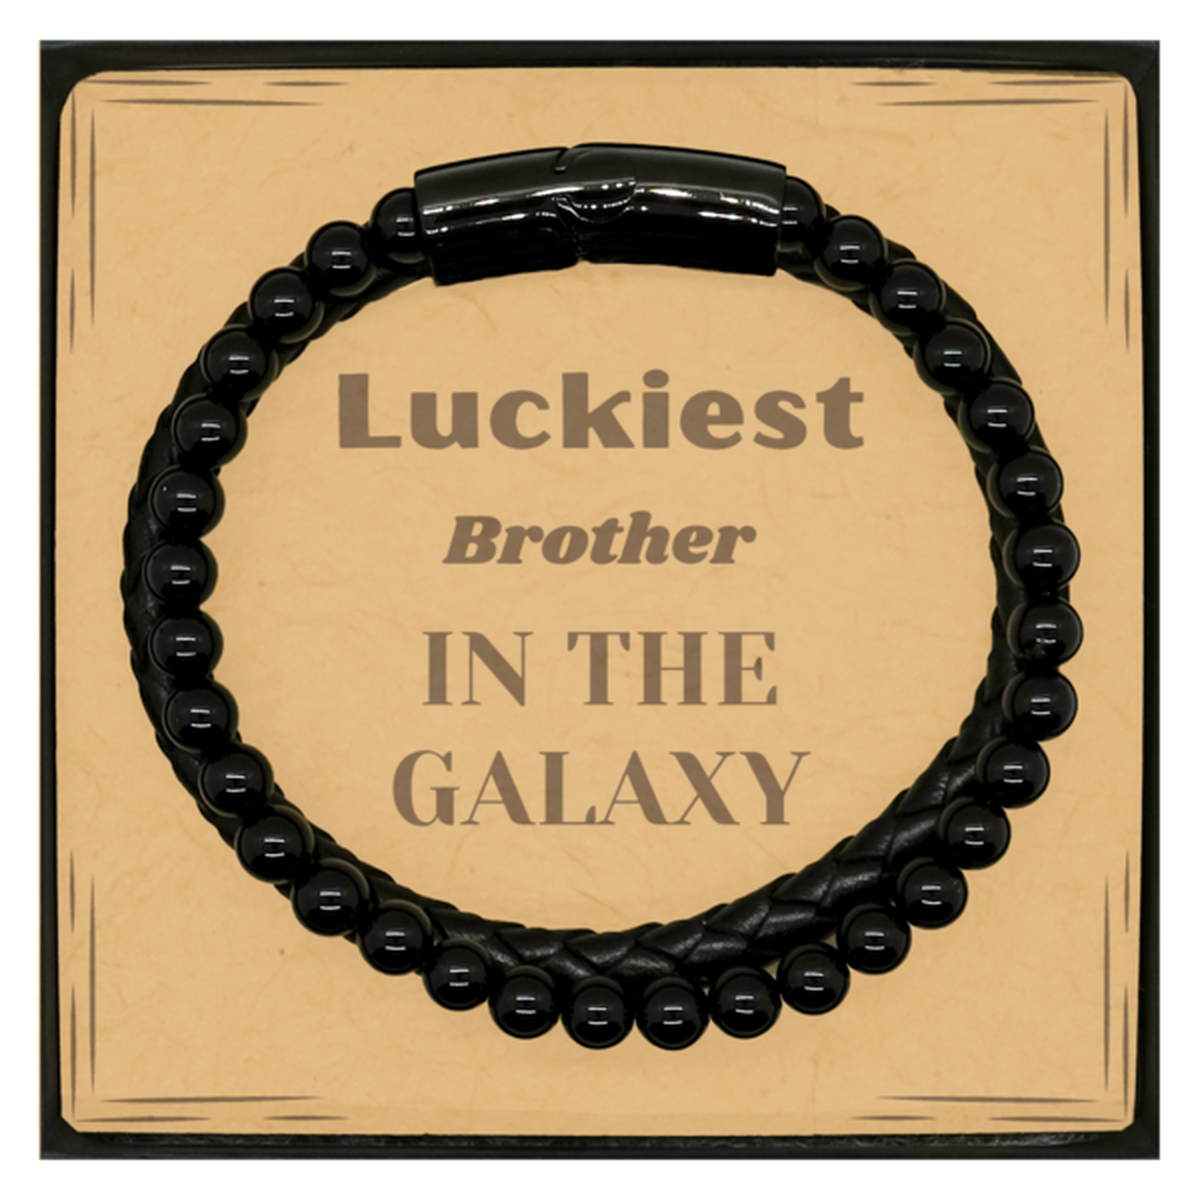 Luckiest Brother in the Galaxy, To My Brother Message Card Gifts, Christmas Brother Stone Leather Bracelets Gifts, X-mas Birthday Unique Gifts For Brother Men Women